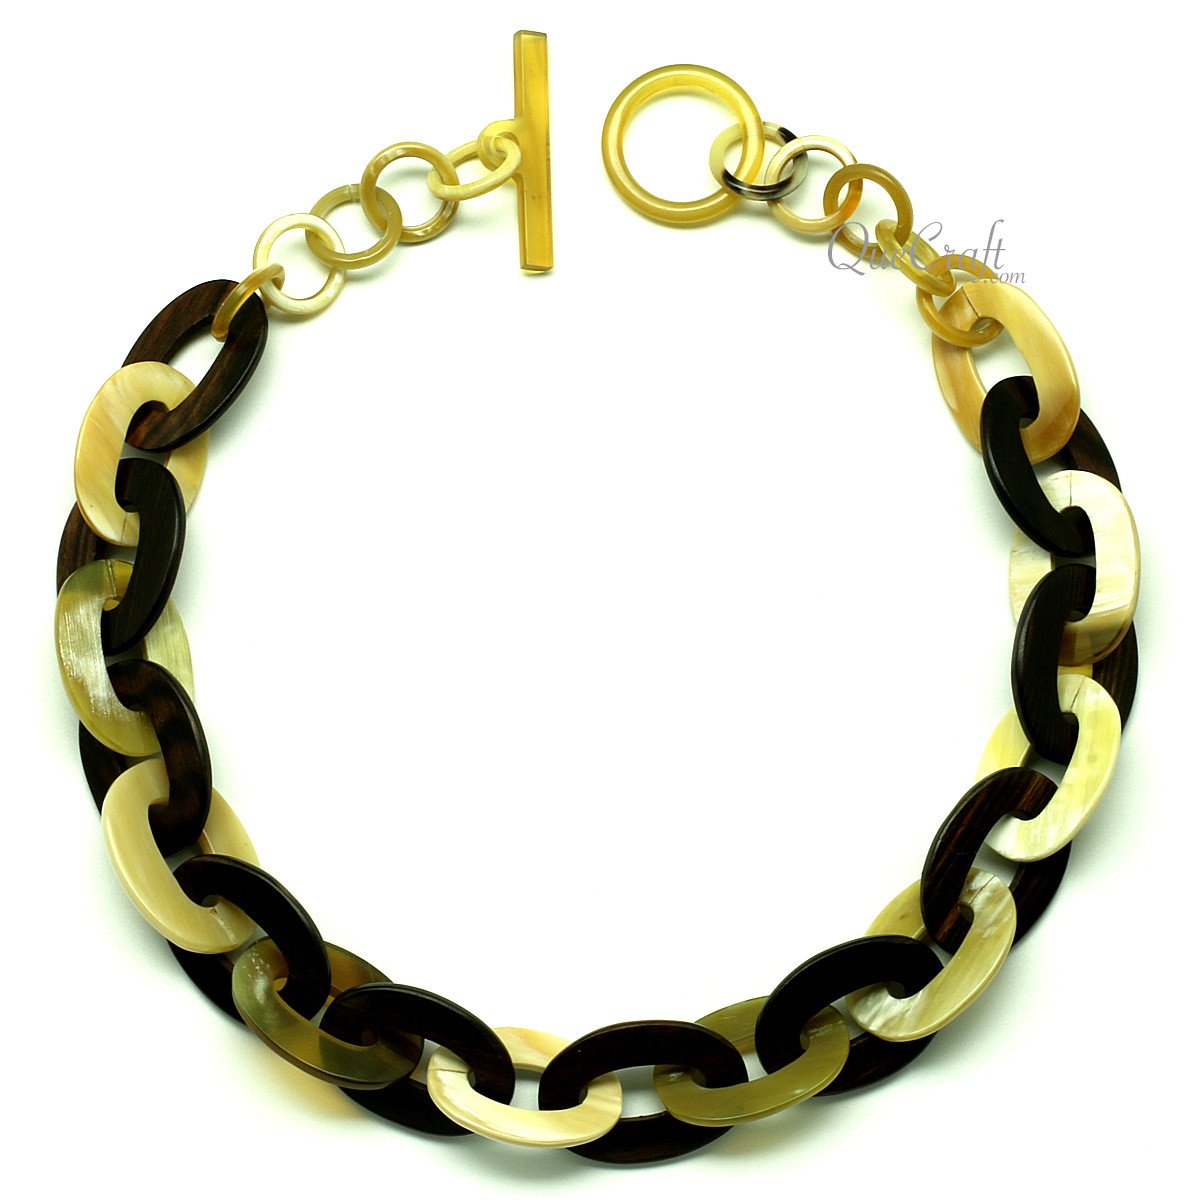 Ebony & Horn Chain Necklace #12900 - HORN JEWELRY